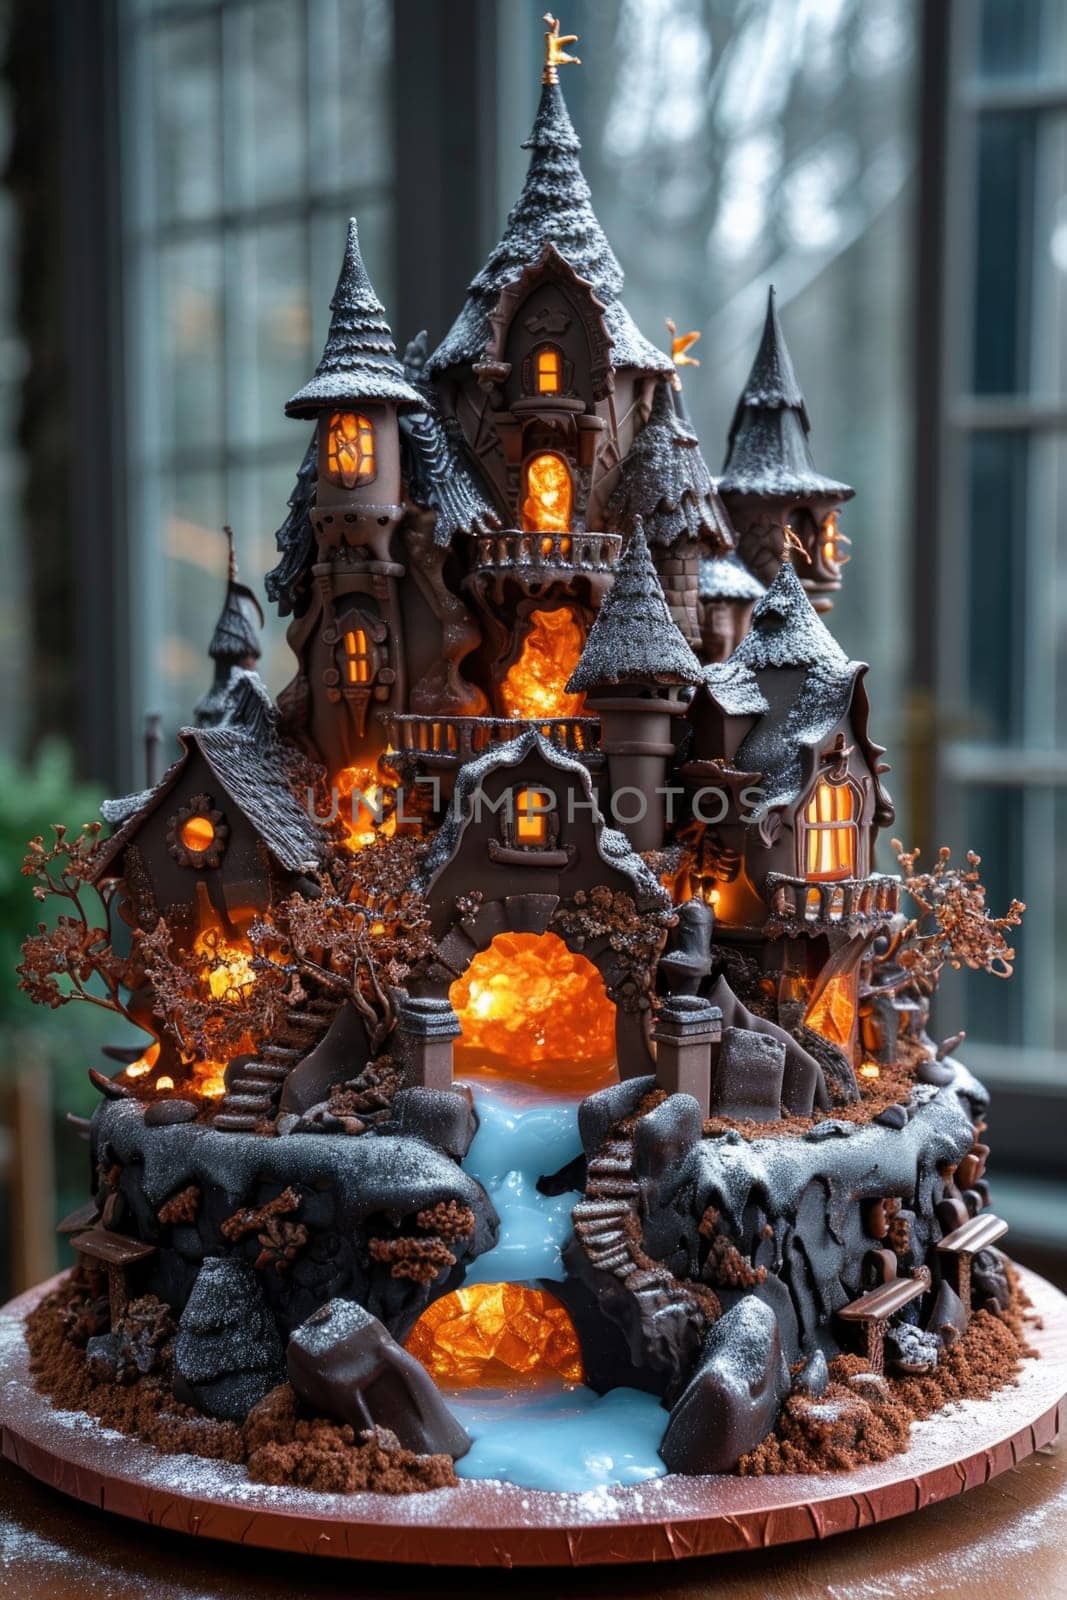 A designer large handmade chocolate cake castle stands on the table.